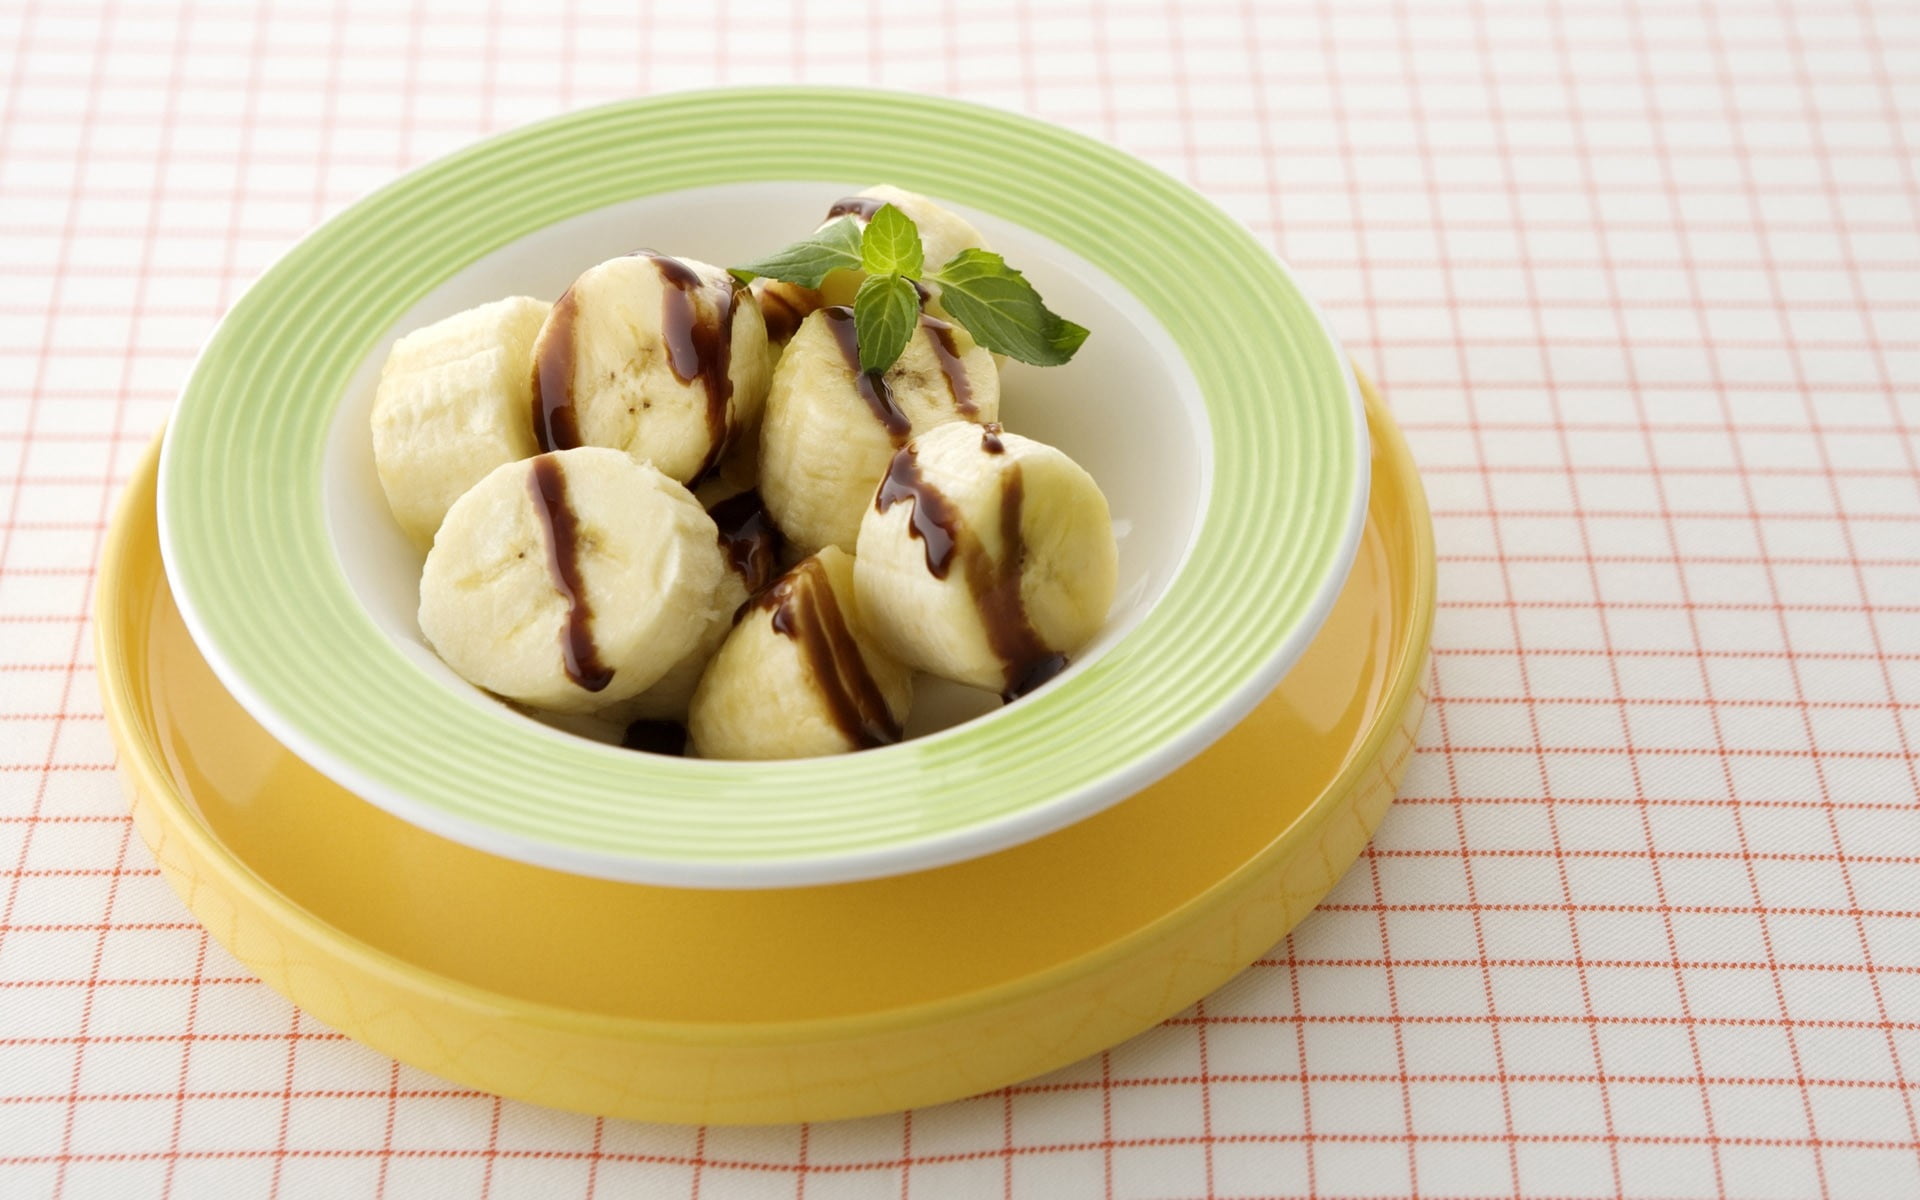 sliced banana with chocolate syrup, food, gourmet, close-up, food And Drink